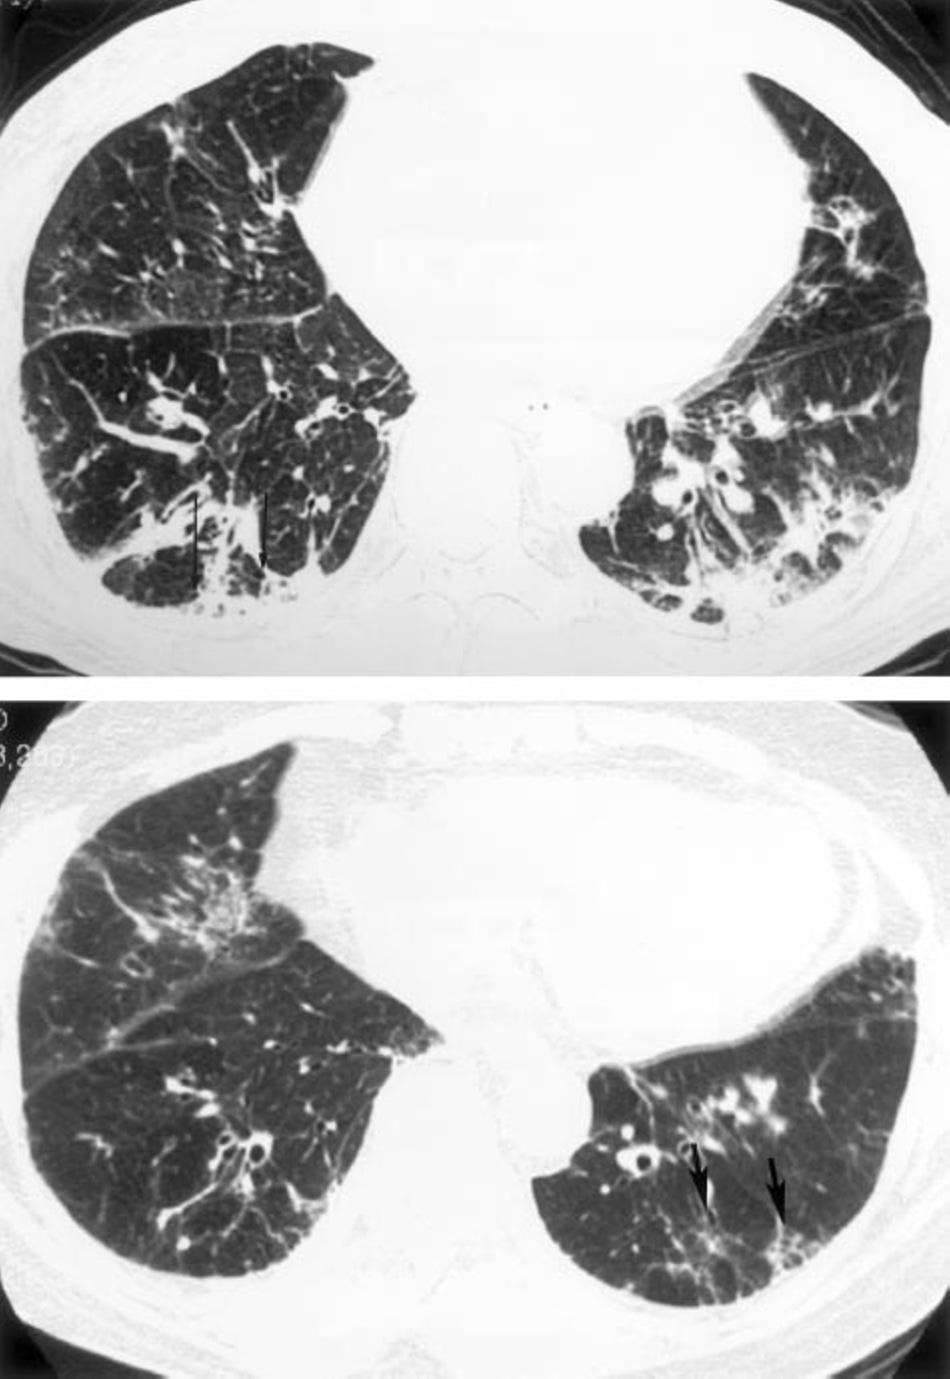 Figure 3. A 63-year-old woman with NSIP and DM in group II. Top: high-resolution CT scan of the lung bases showing a thickening of the septal lines and peripheral consolidation.